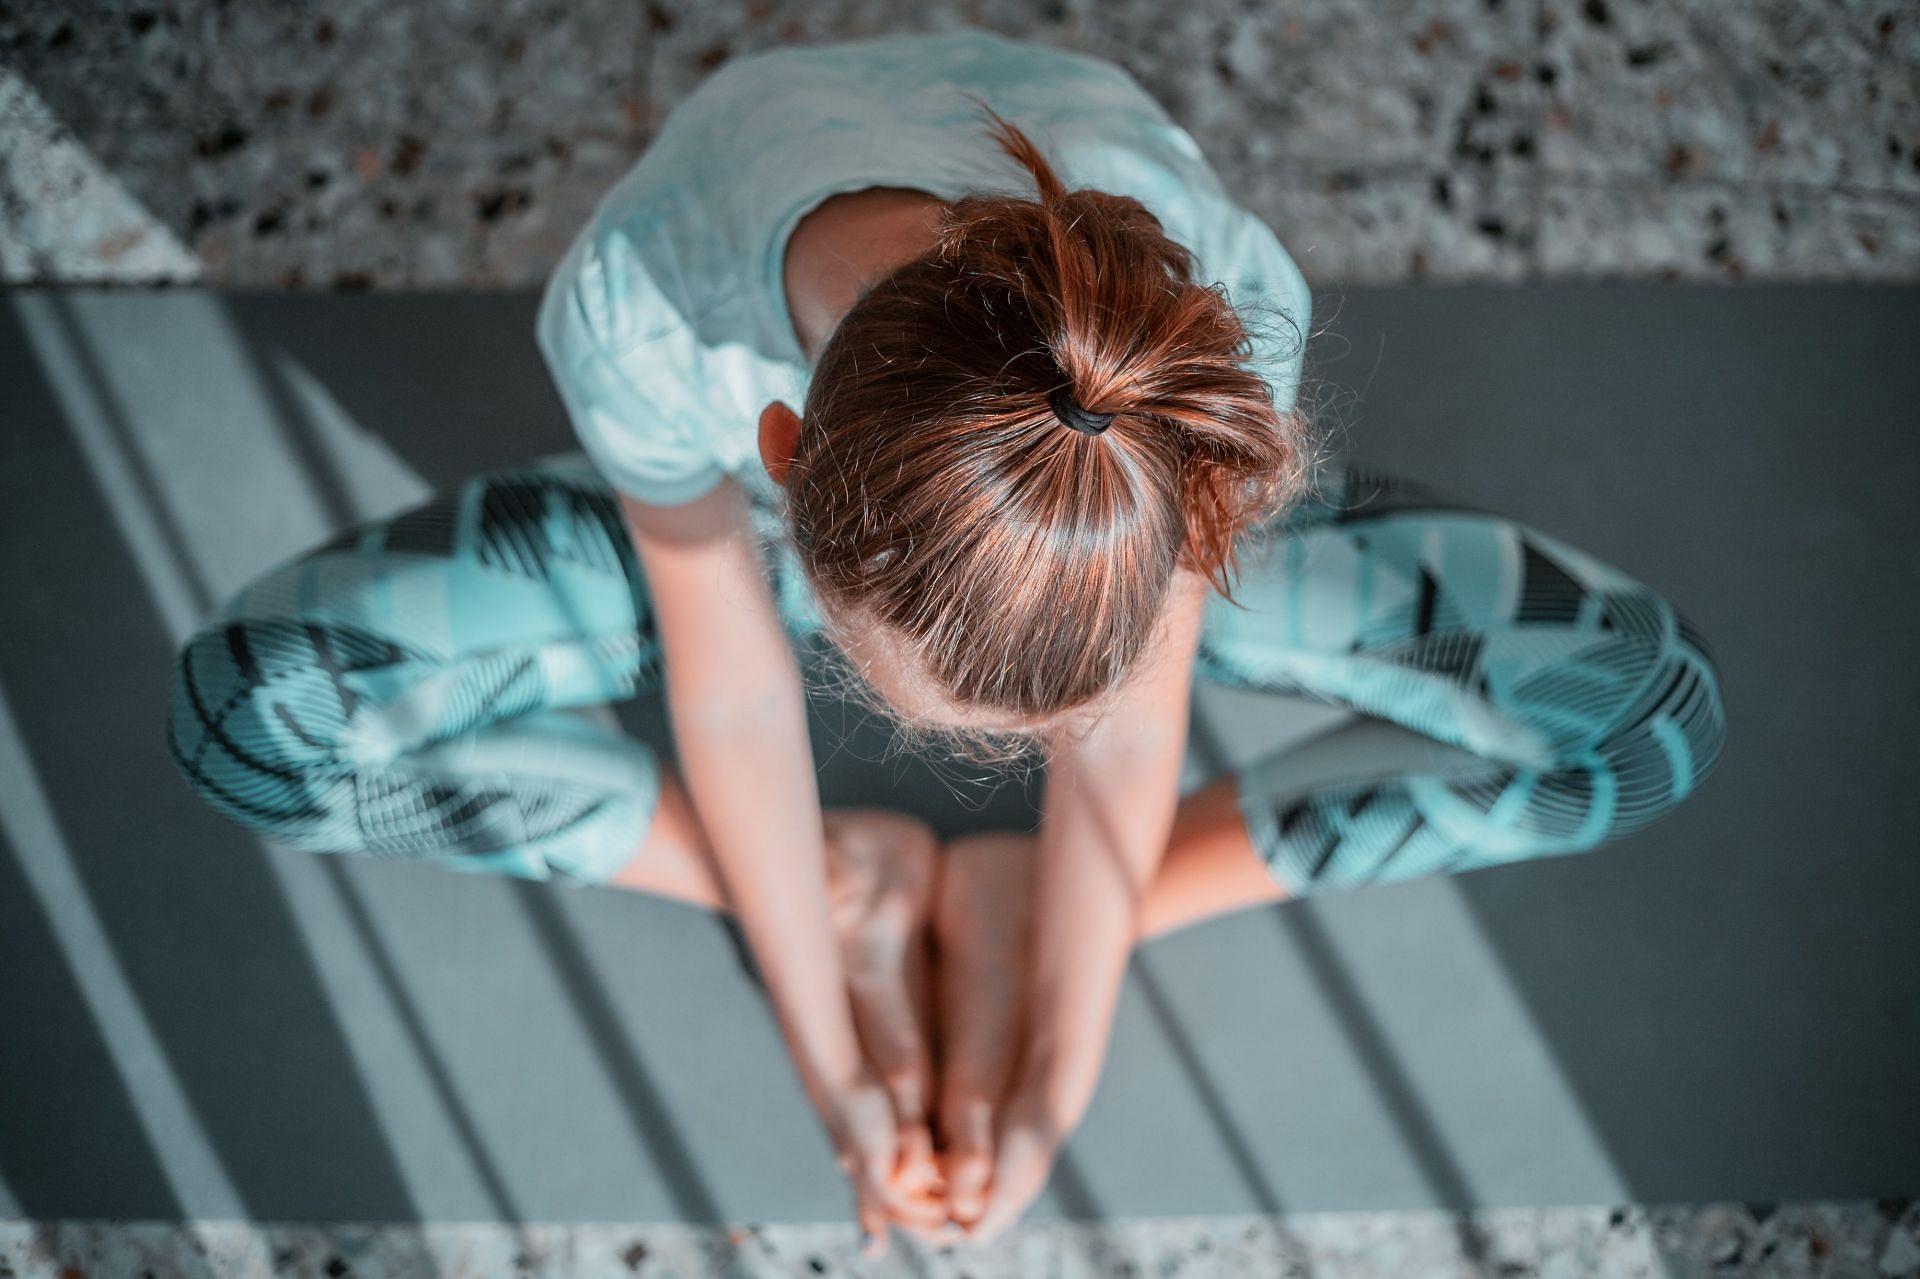 Yoga practice helps to stabilize and relieve sore joints by strengthening the muscles around them. (Image via Unsplash/ Kajetan Sumila)